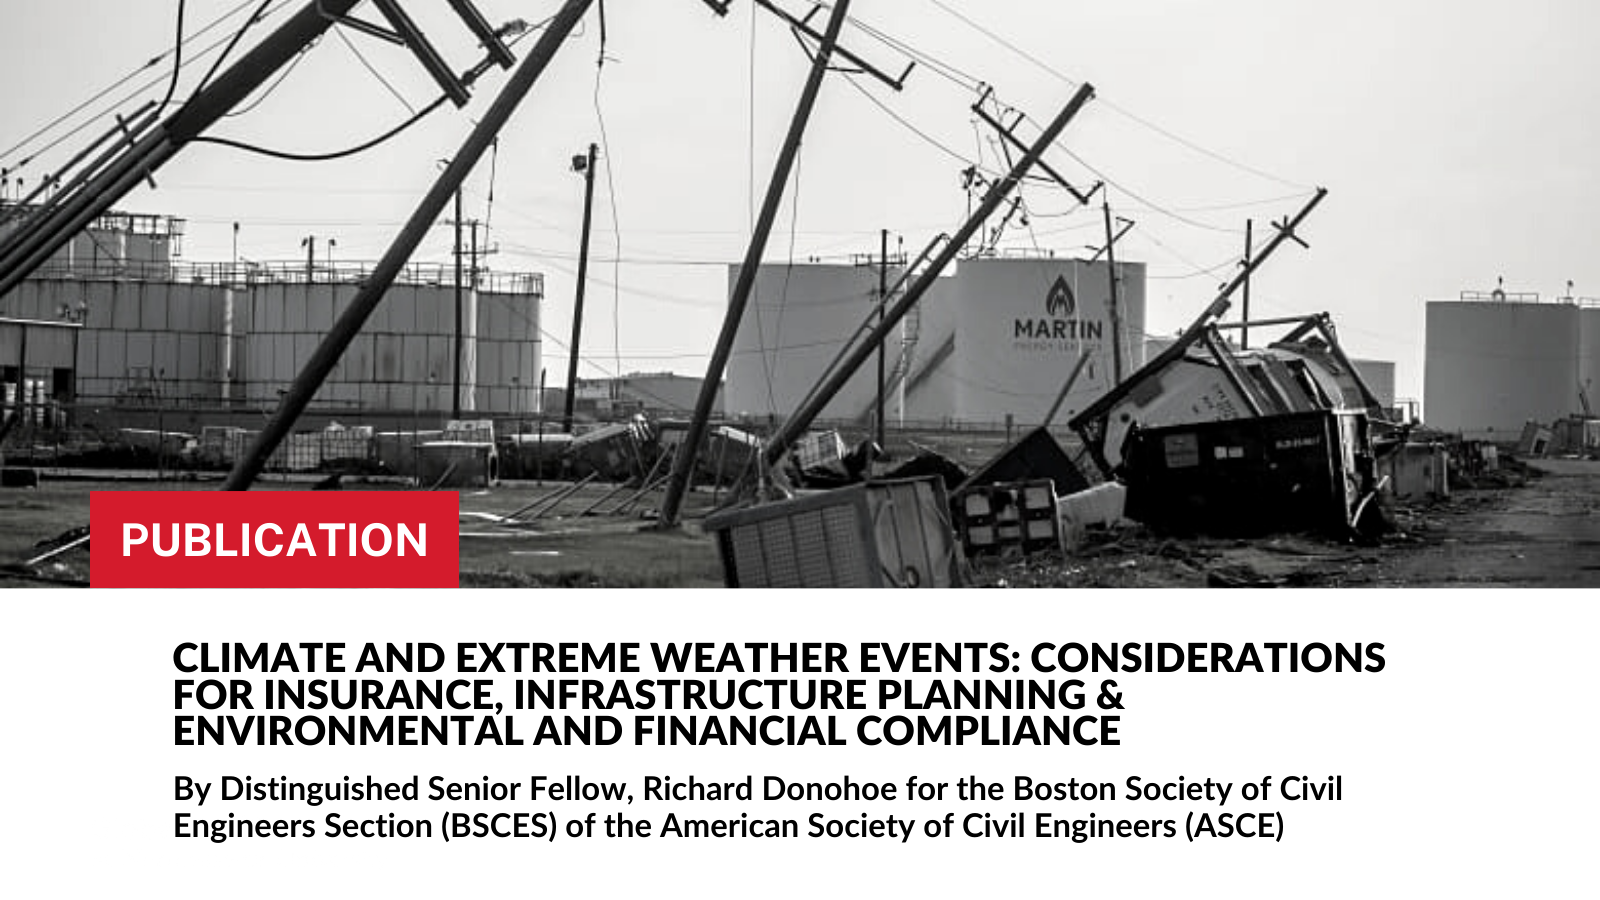 Climate and Extreme Weather Events: Considerations for Insurance, Infrastructure Planning & Environmental and Financial Compliance